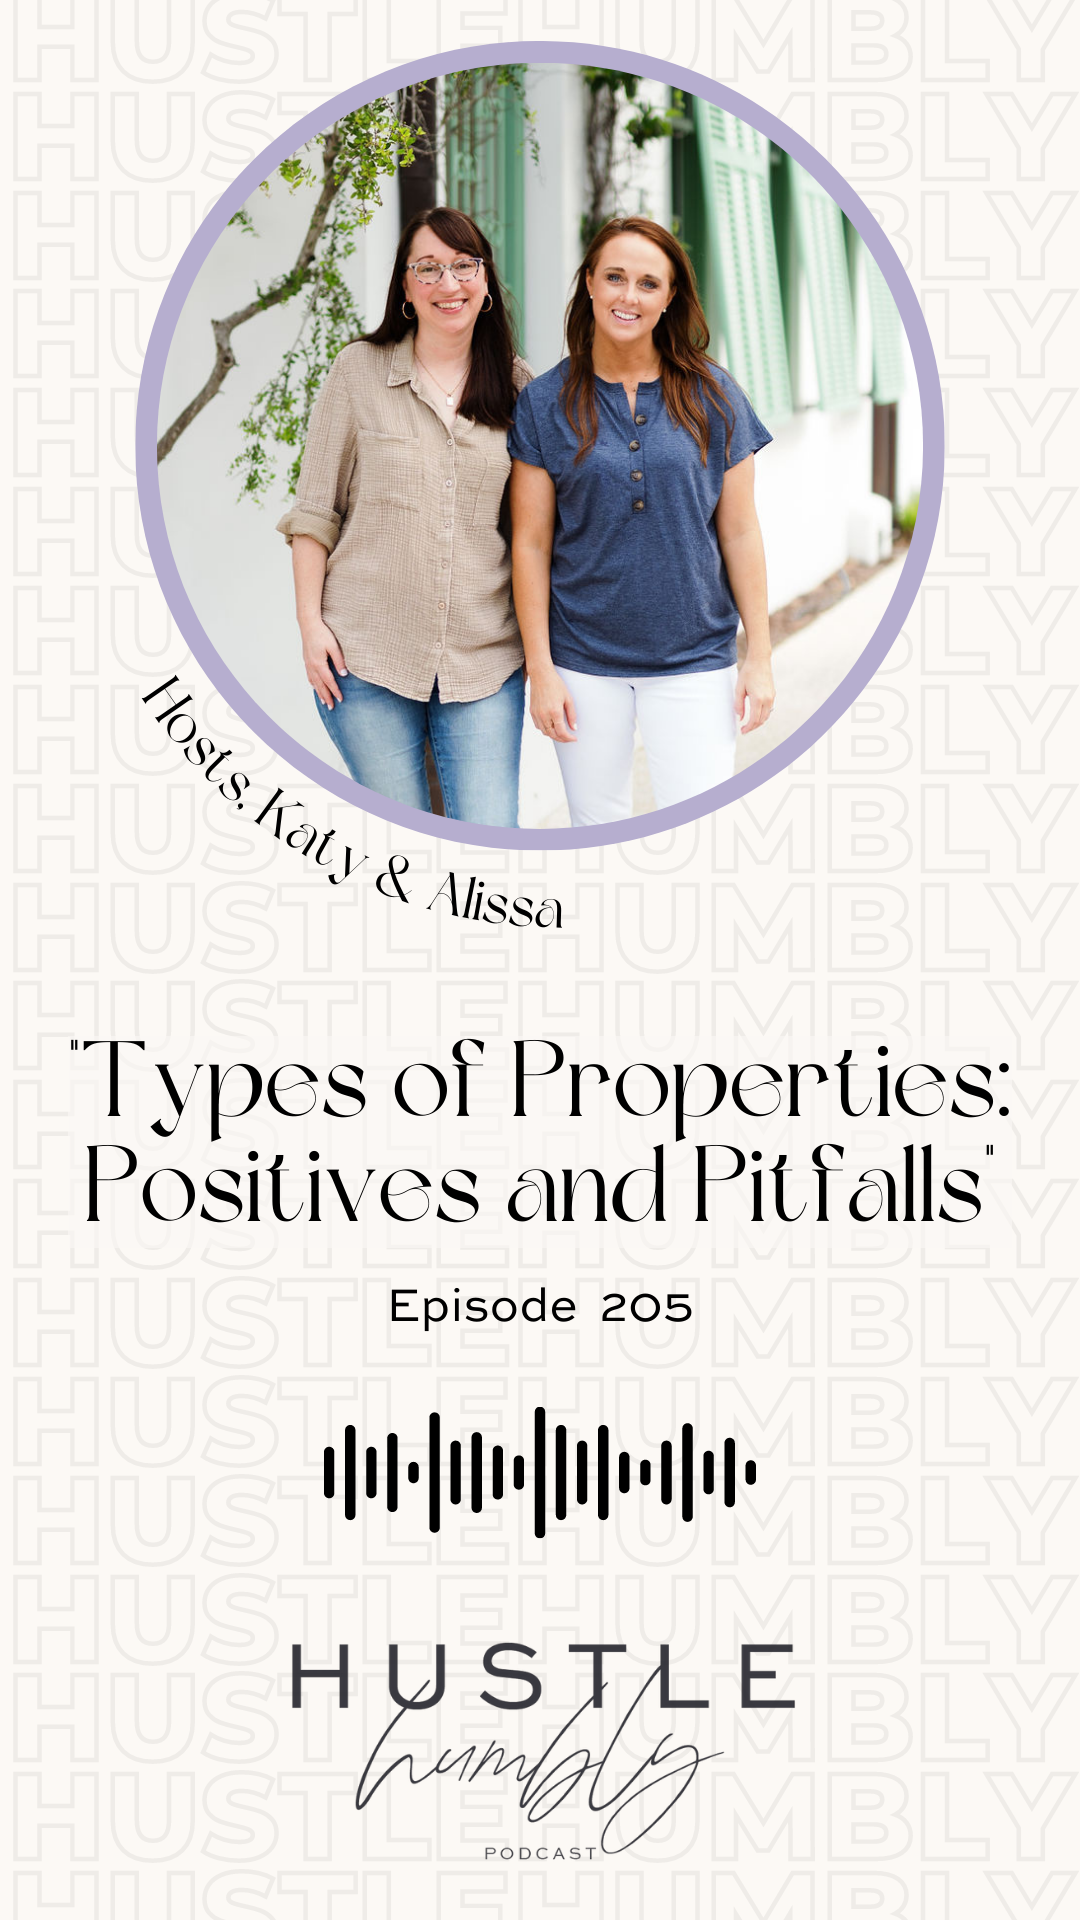 Hustle Humbly Podcast 205: Types of Properties: Positives and Pitfalls
